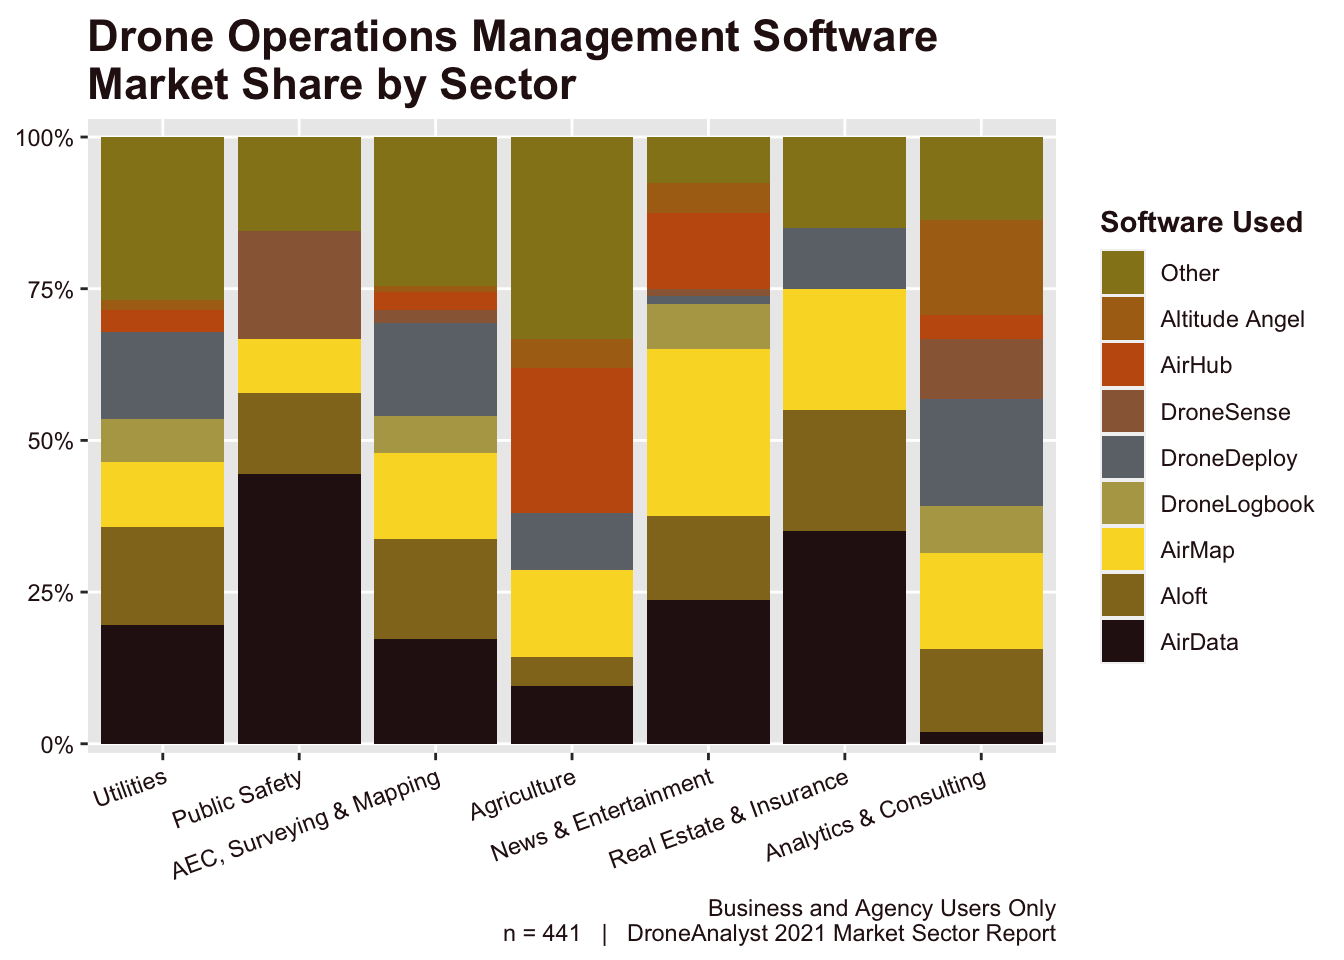 Drone Operations Management Software Market Share by Sector